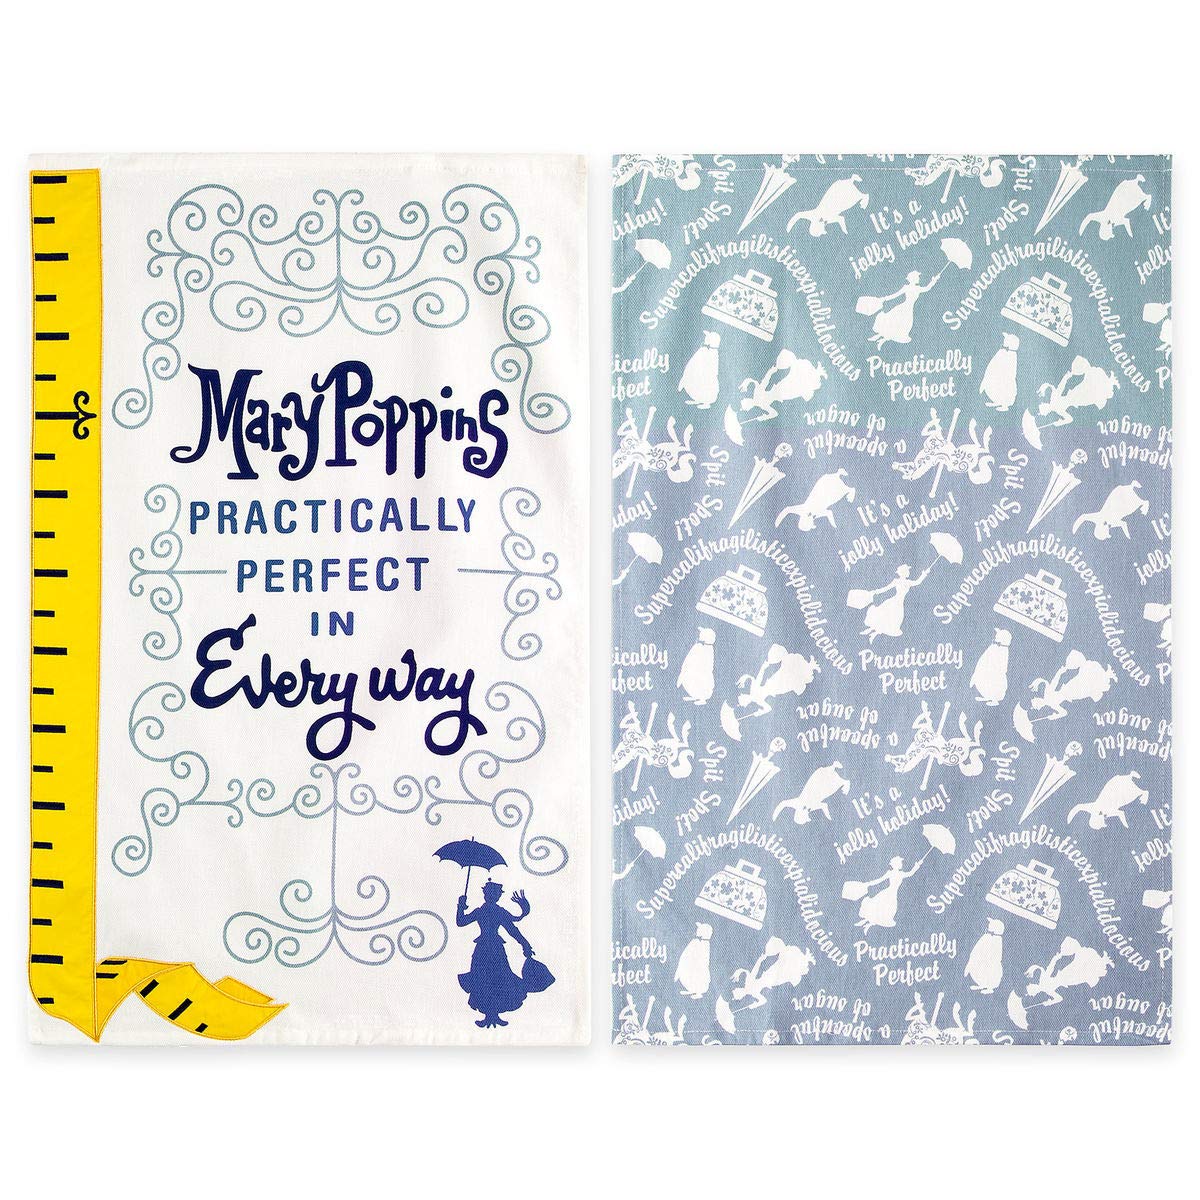 Authentic Mary Poppins Kitchen Towel Set